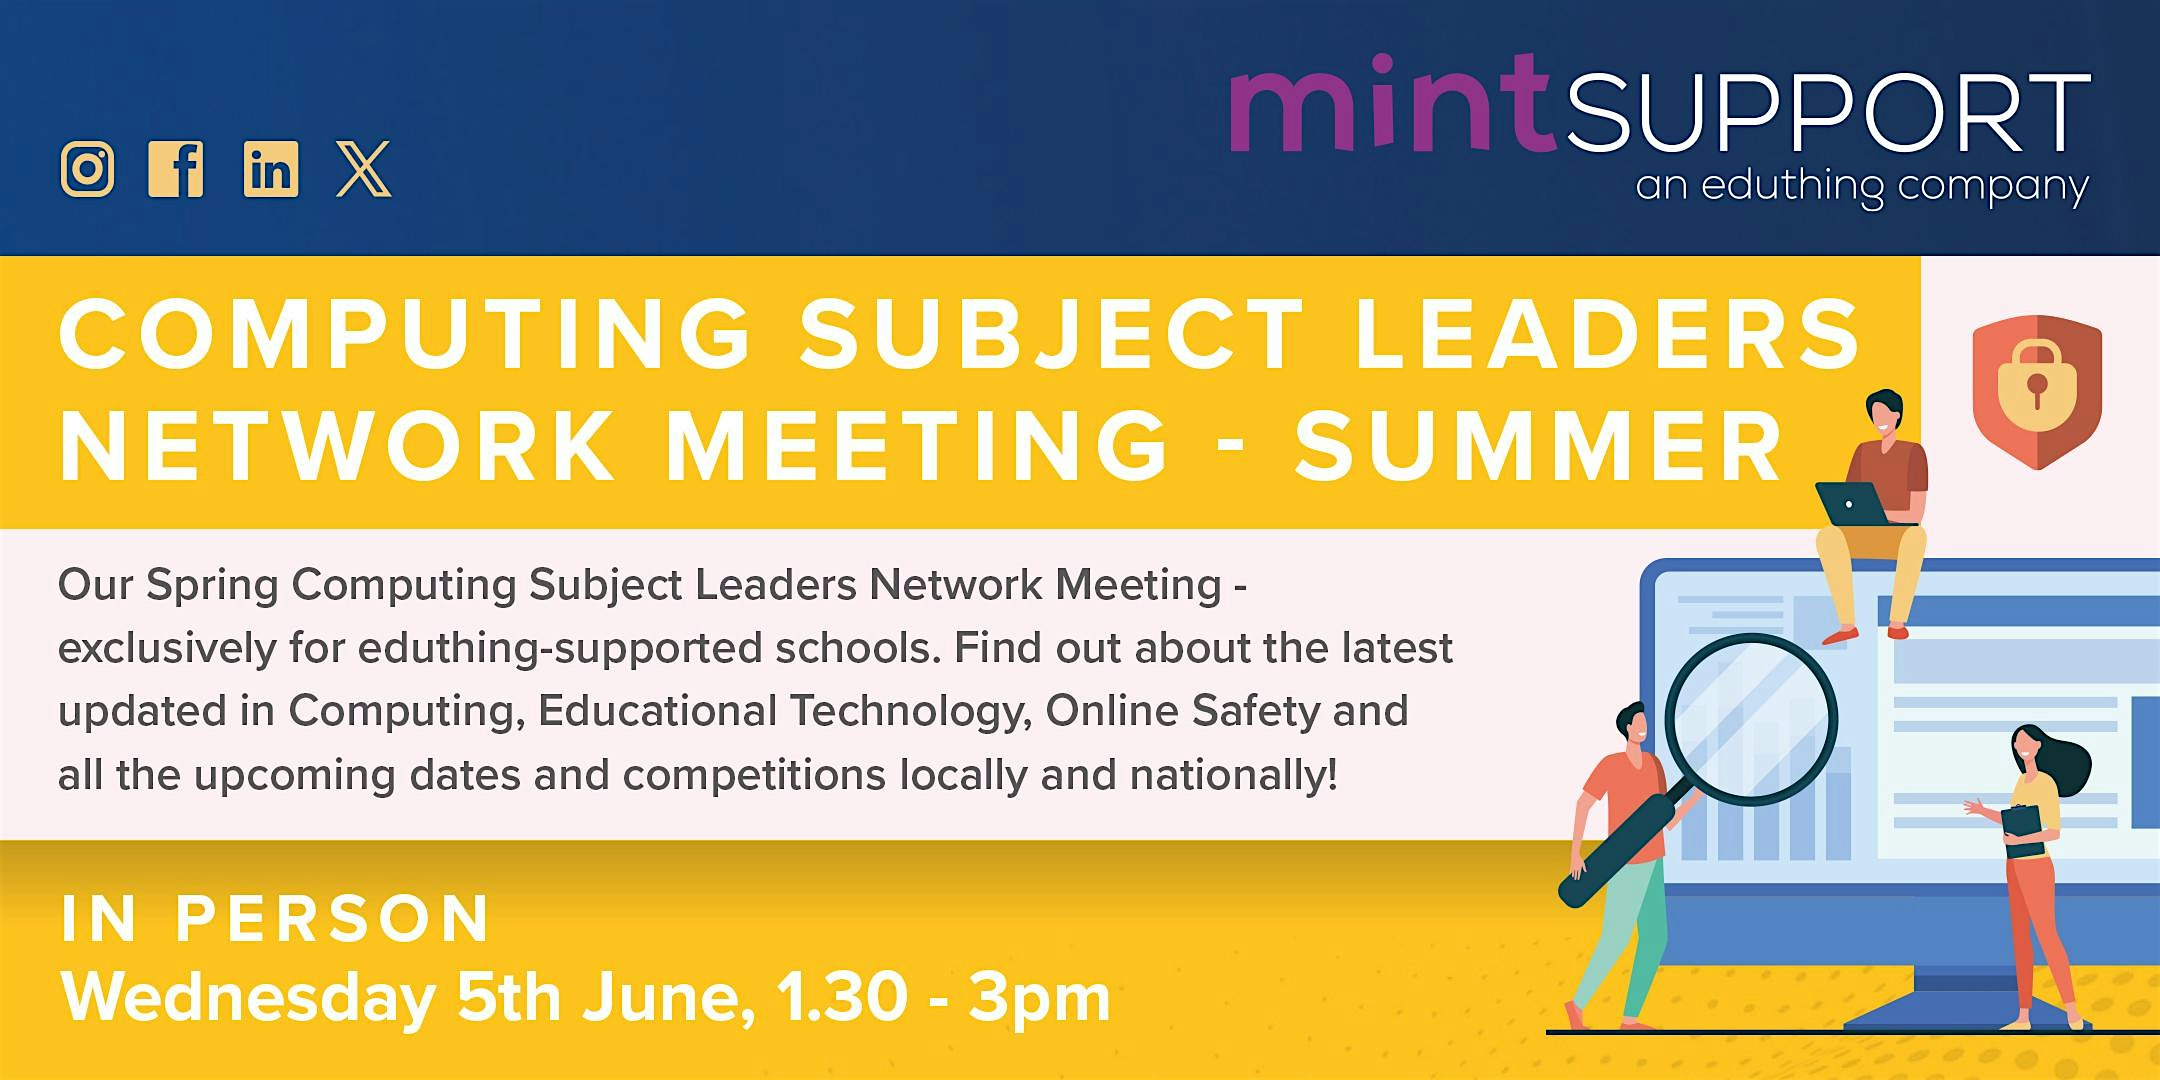 Computing Subject Leaders Network Meeting – Summer (Mint Support)